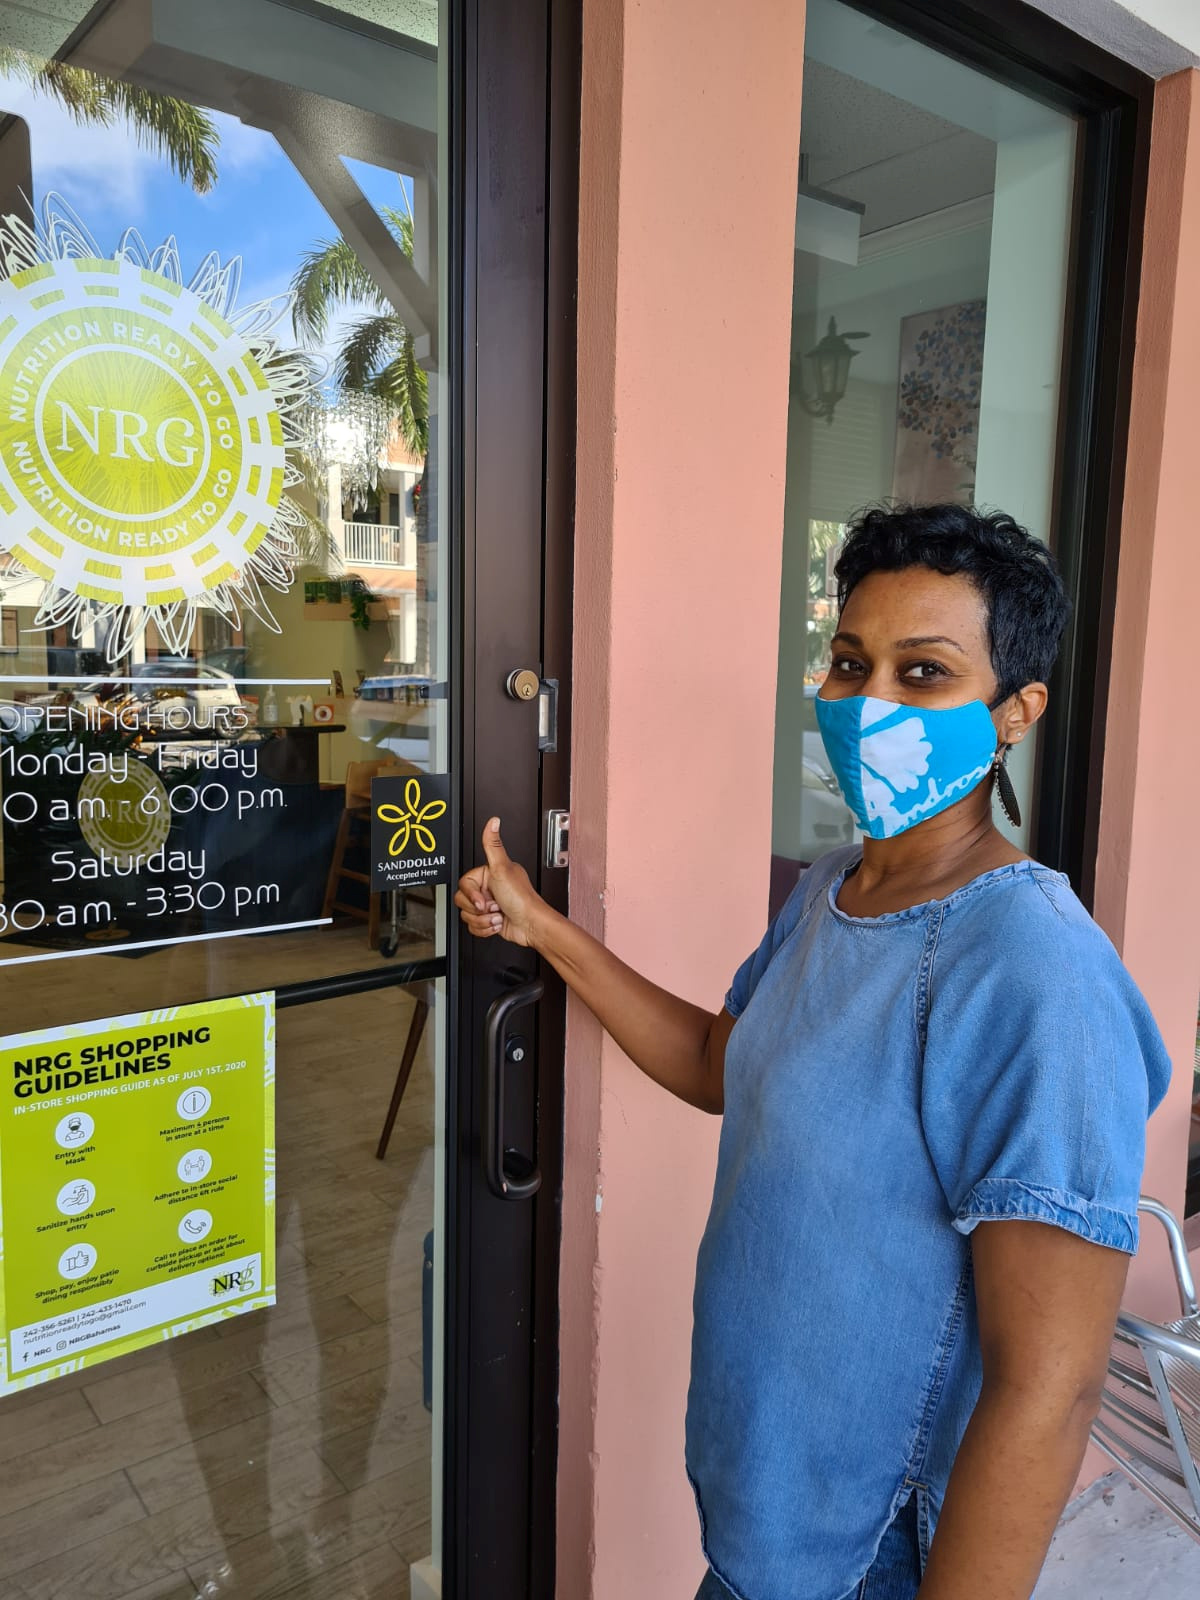 Dawn Sands, owner, poses for a photograph outside NRG cafe in Nassau, the Bahamas in November 2020 in this handout image obtained by Reuters on December 17, 2020. Central Bank of The Bahamas (CBoB)/Handout via REUTERS